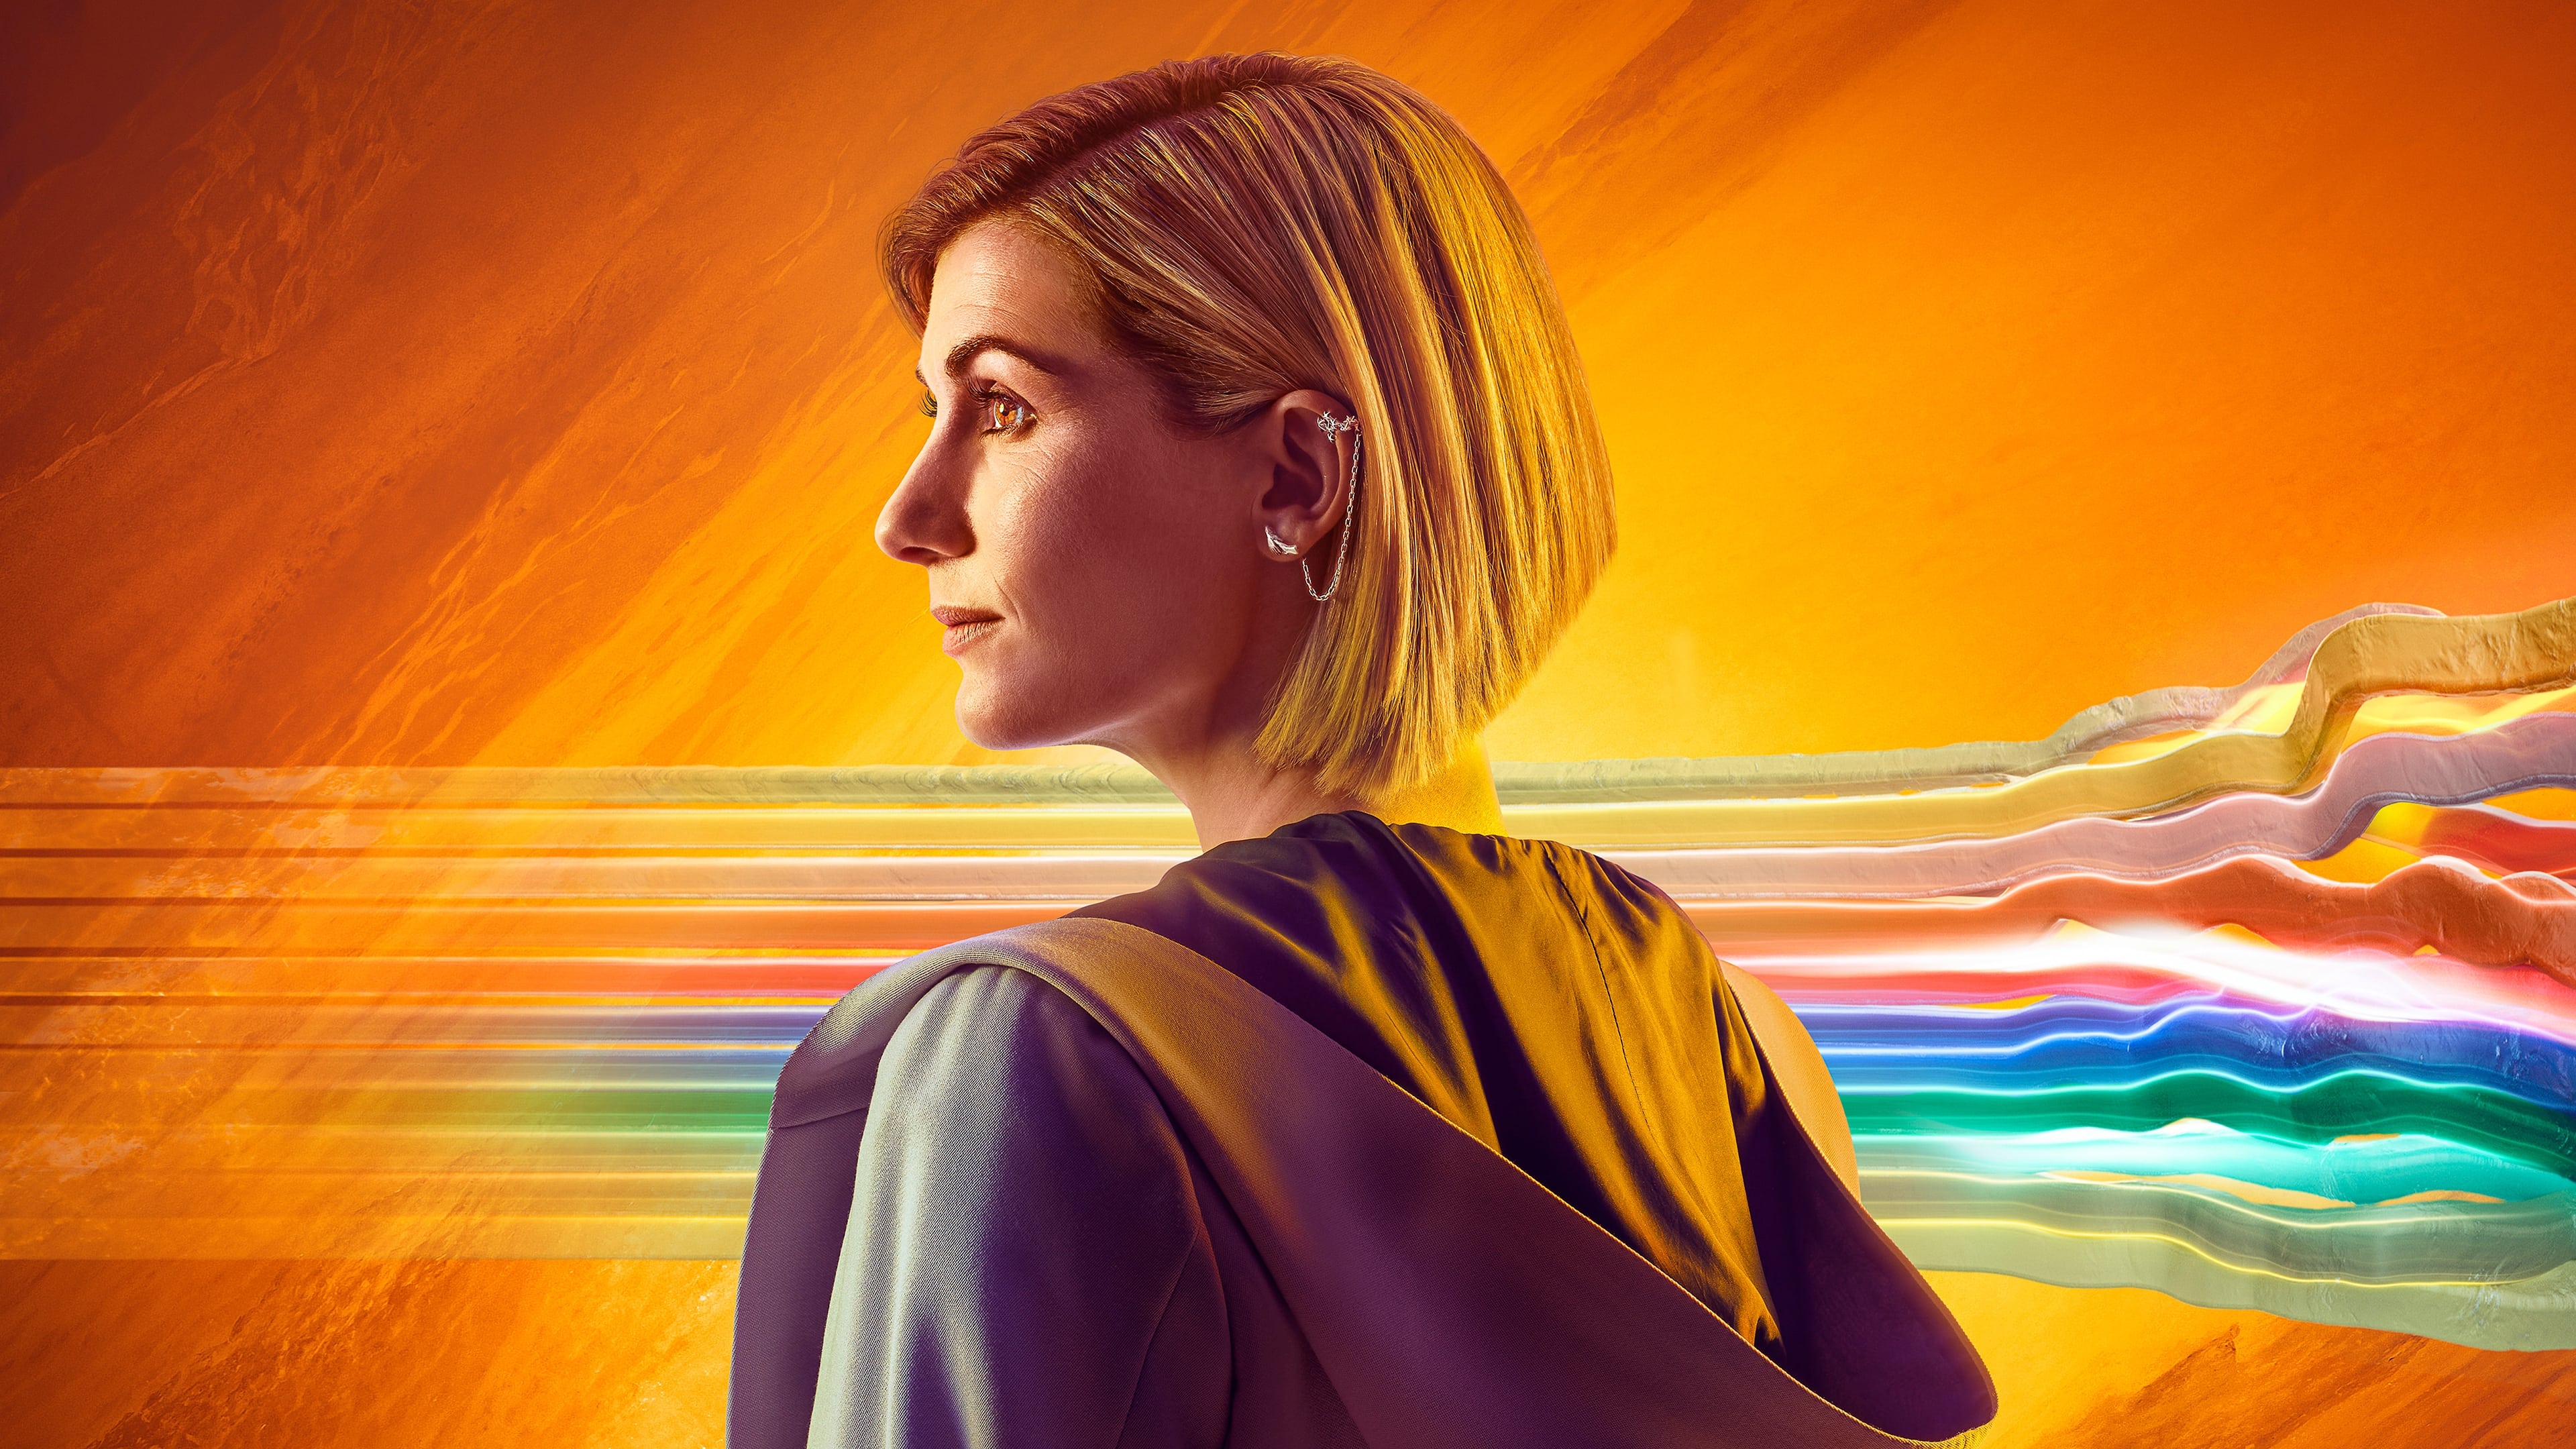 Download mobile wallpaper Doctor Who, Tv Show, Jodie Whittaker, Thirteenth Doctor for free.